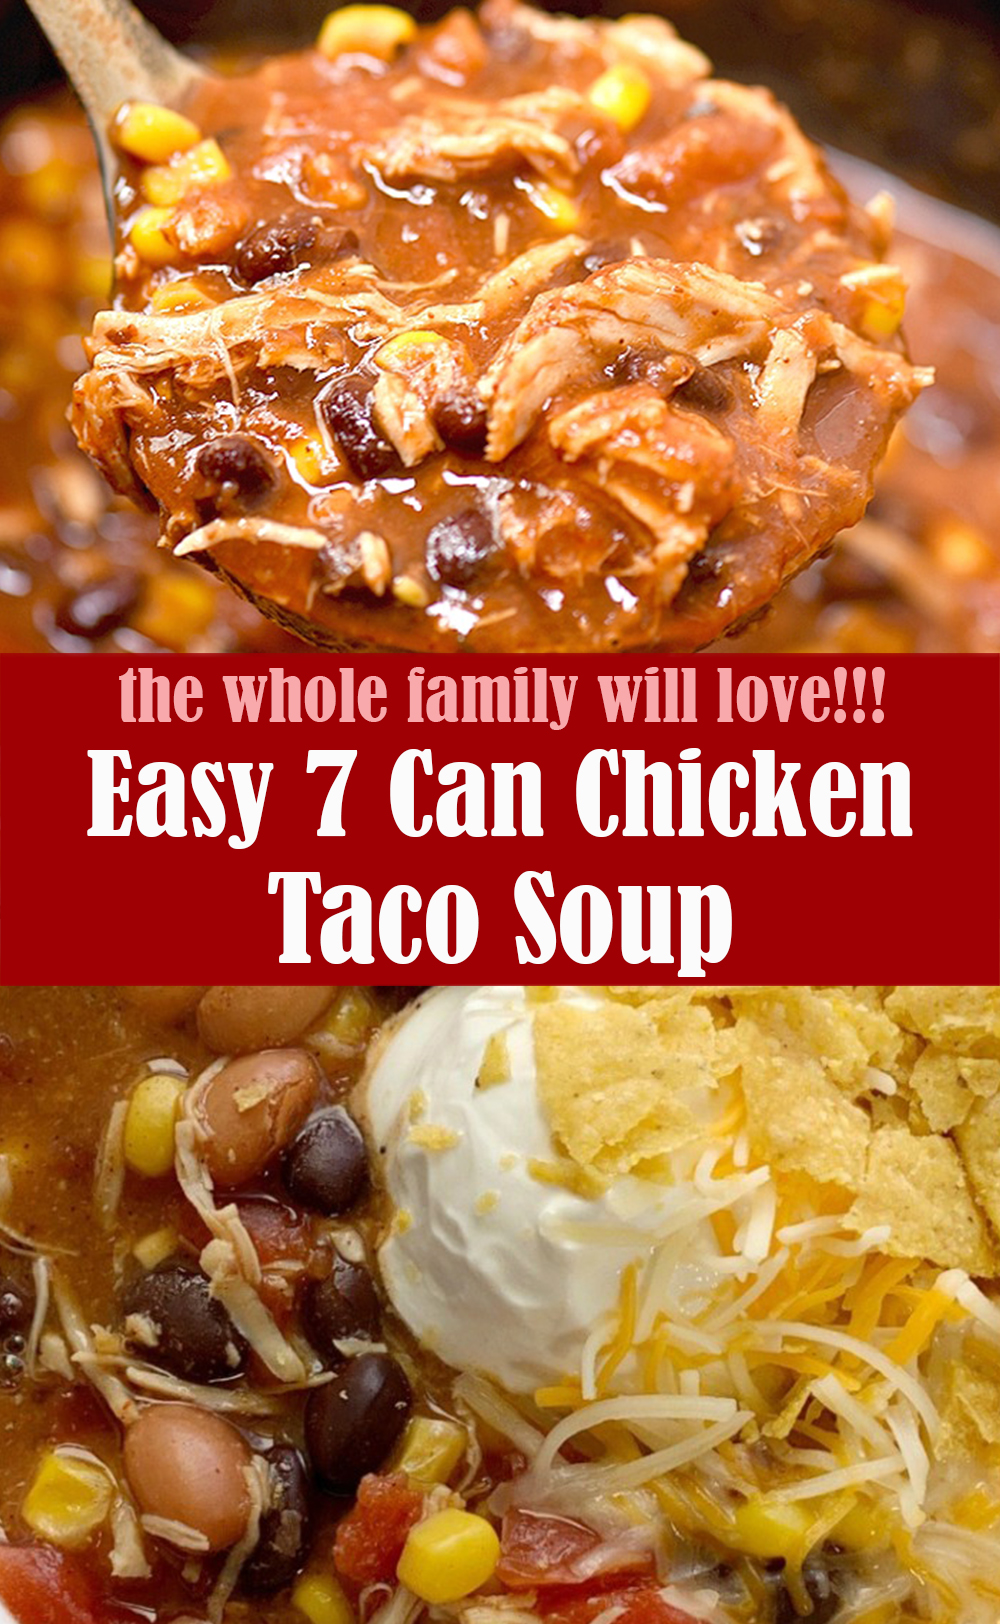 Easy 7 Can Chicken Taco Soup